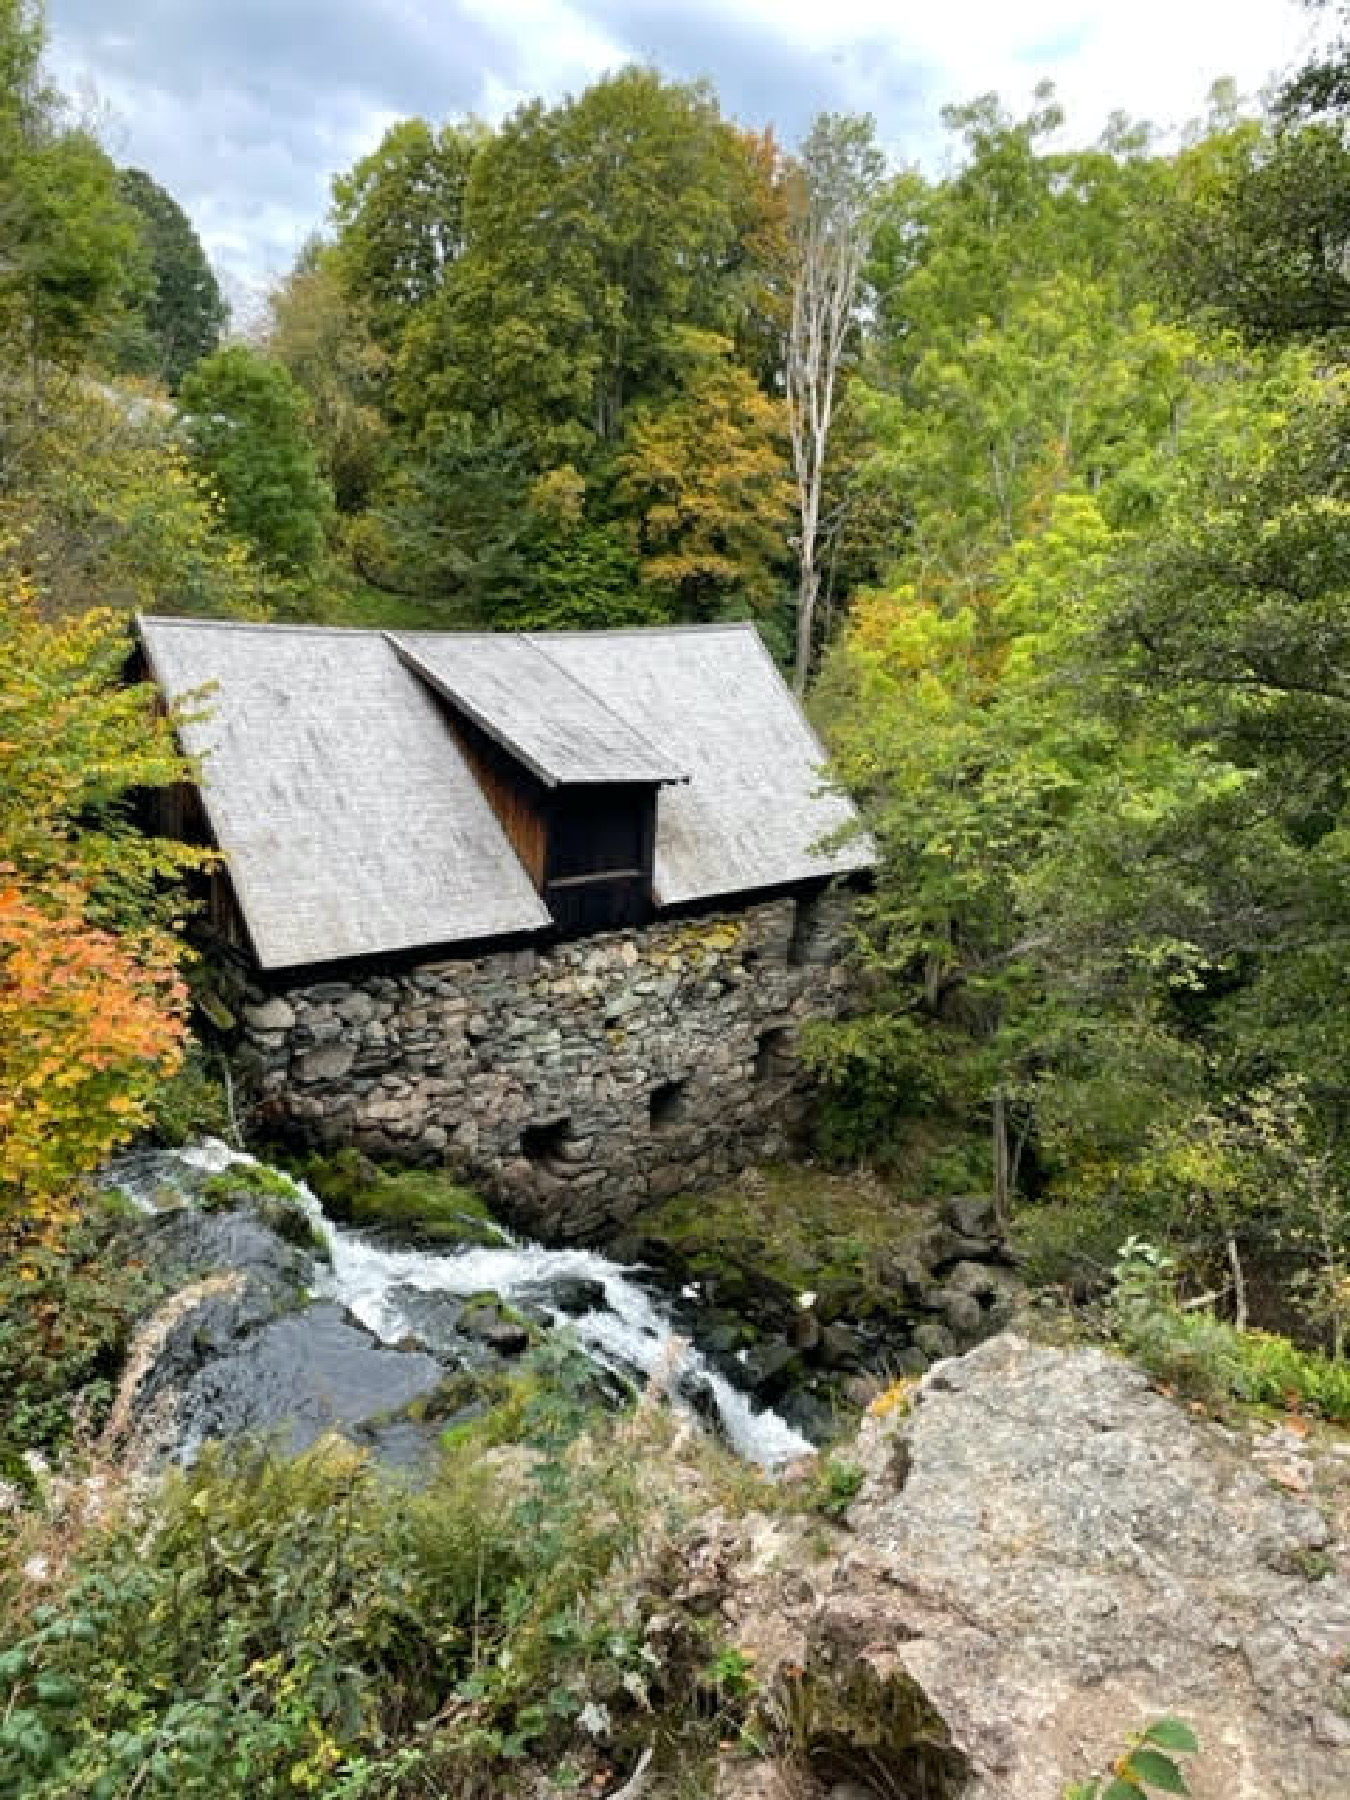 For 800 years, flour mills have employed the waterfalls of Rottle near Granna, Sweden.